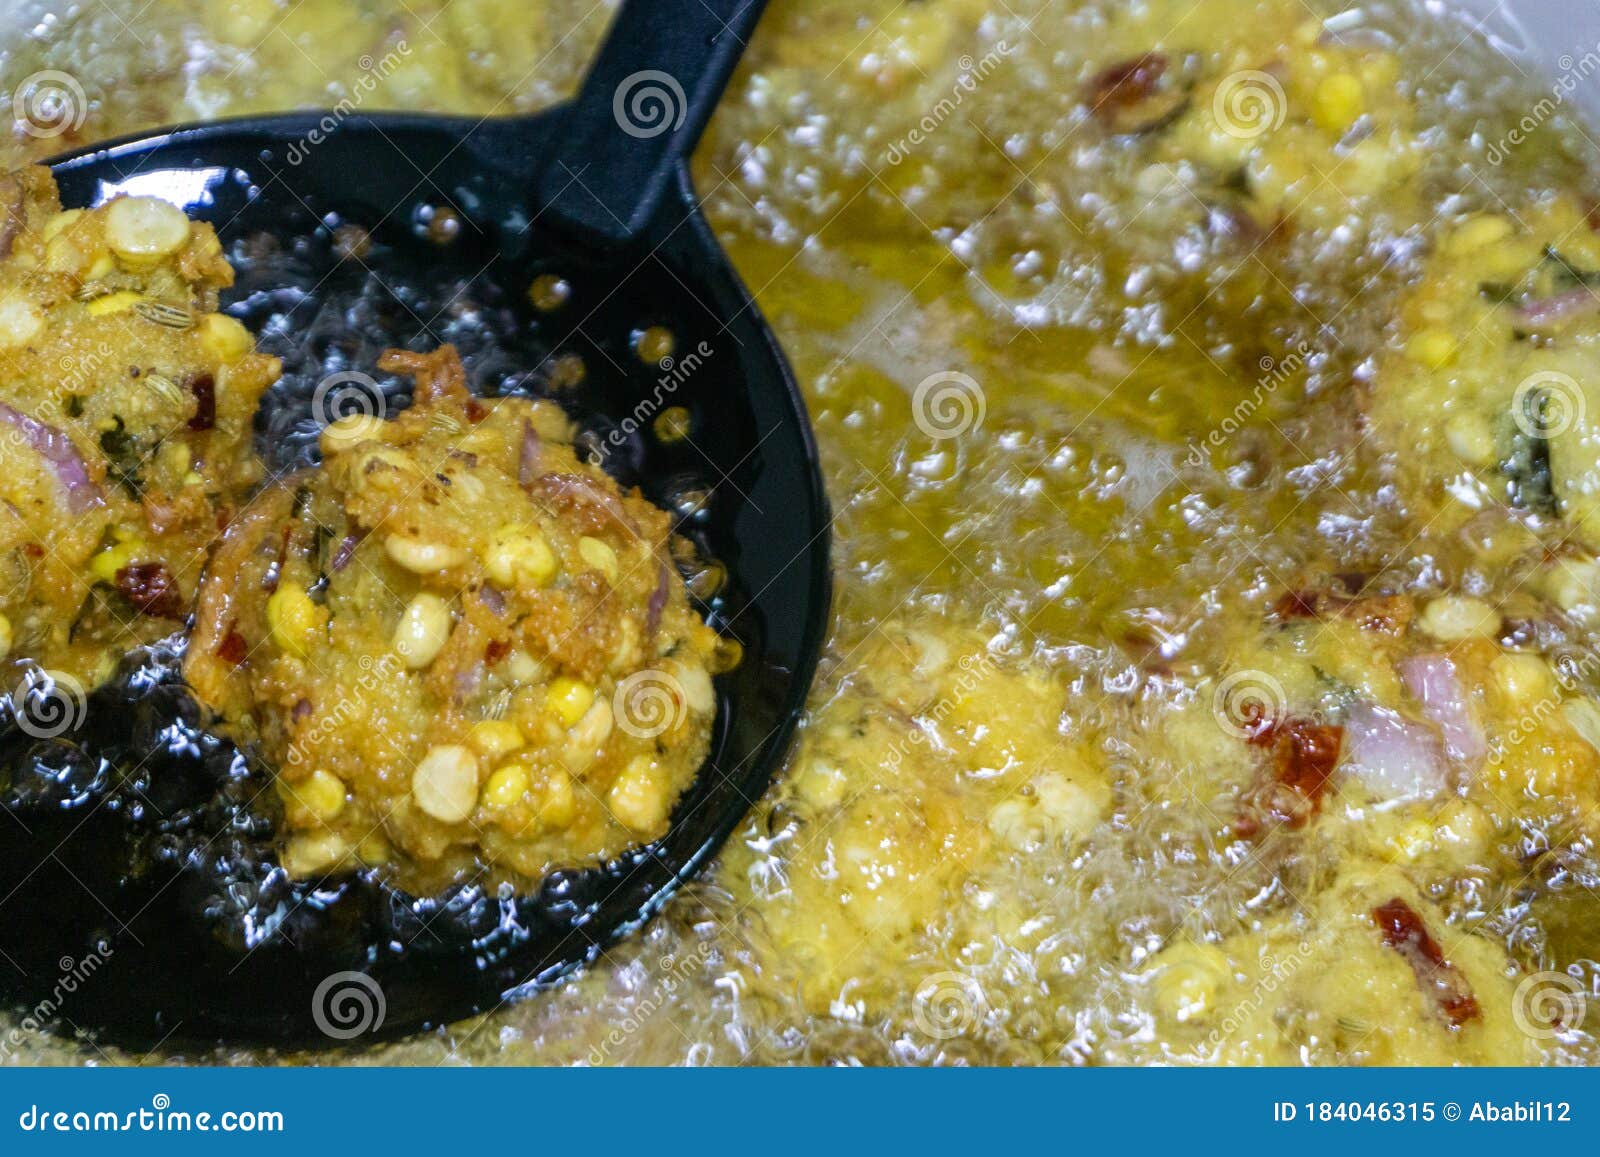 Fried Cook Of Batate Vade, Batate Vadey, Fried Dhal Beans 